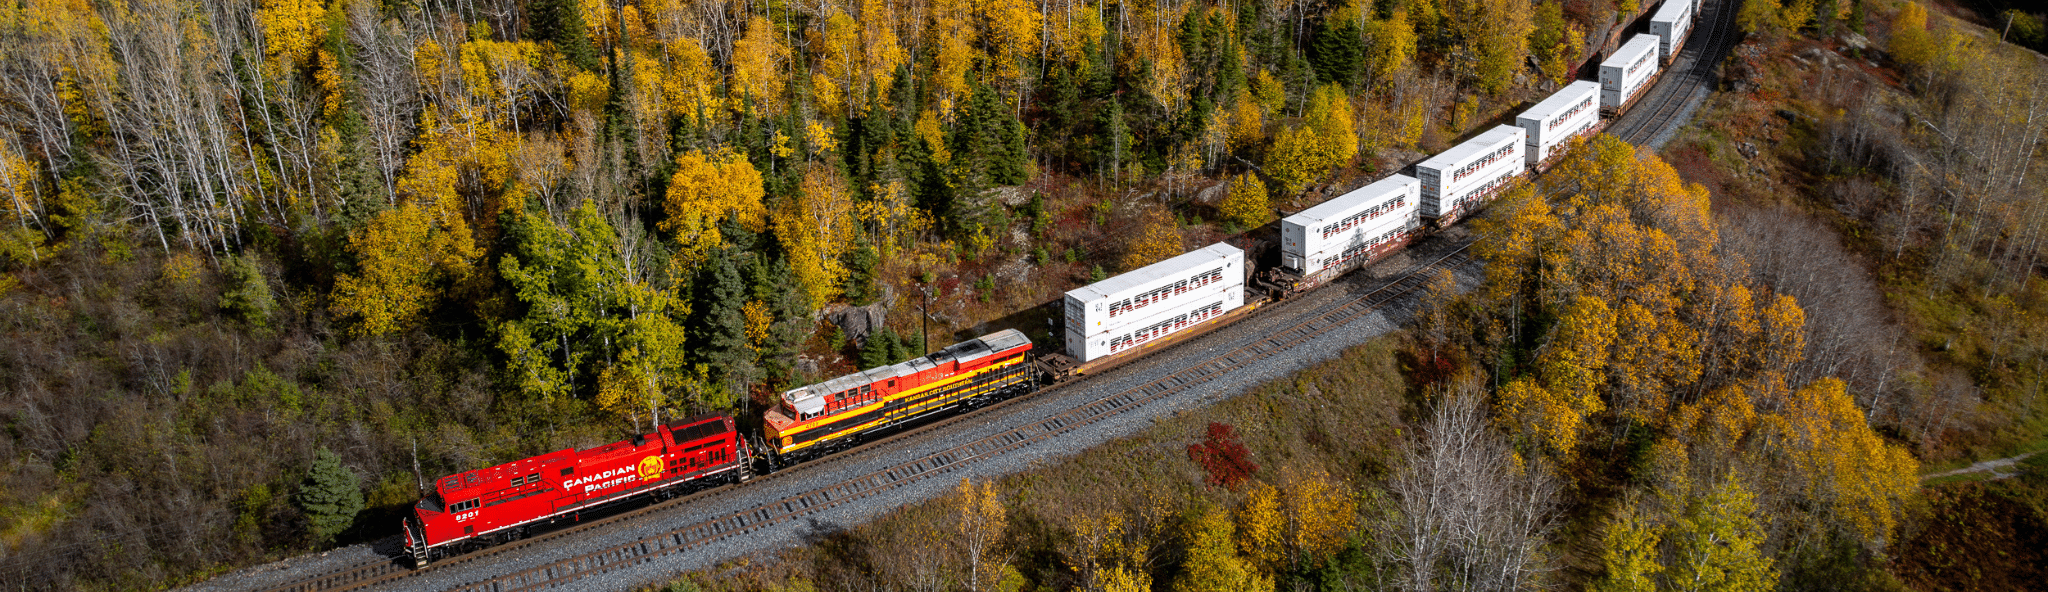 CP Rail train carrying Fastfrate containers